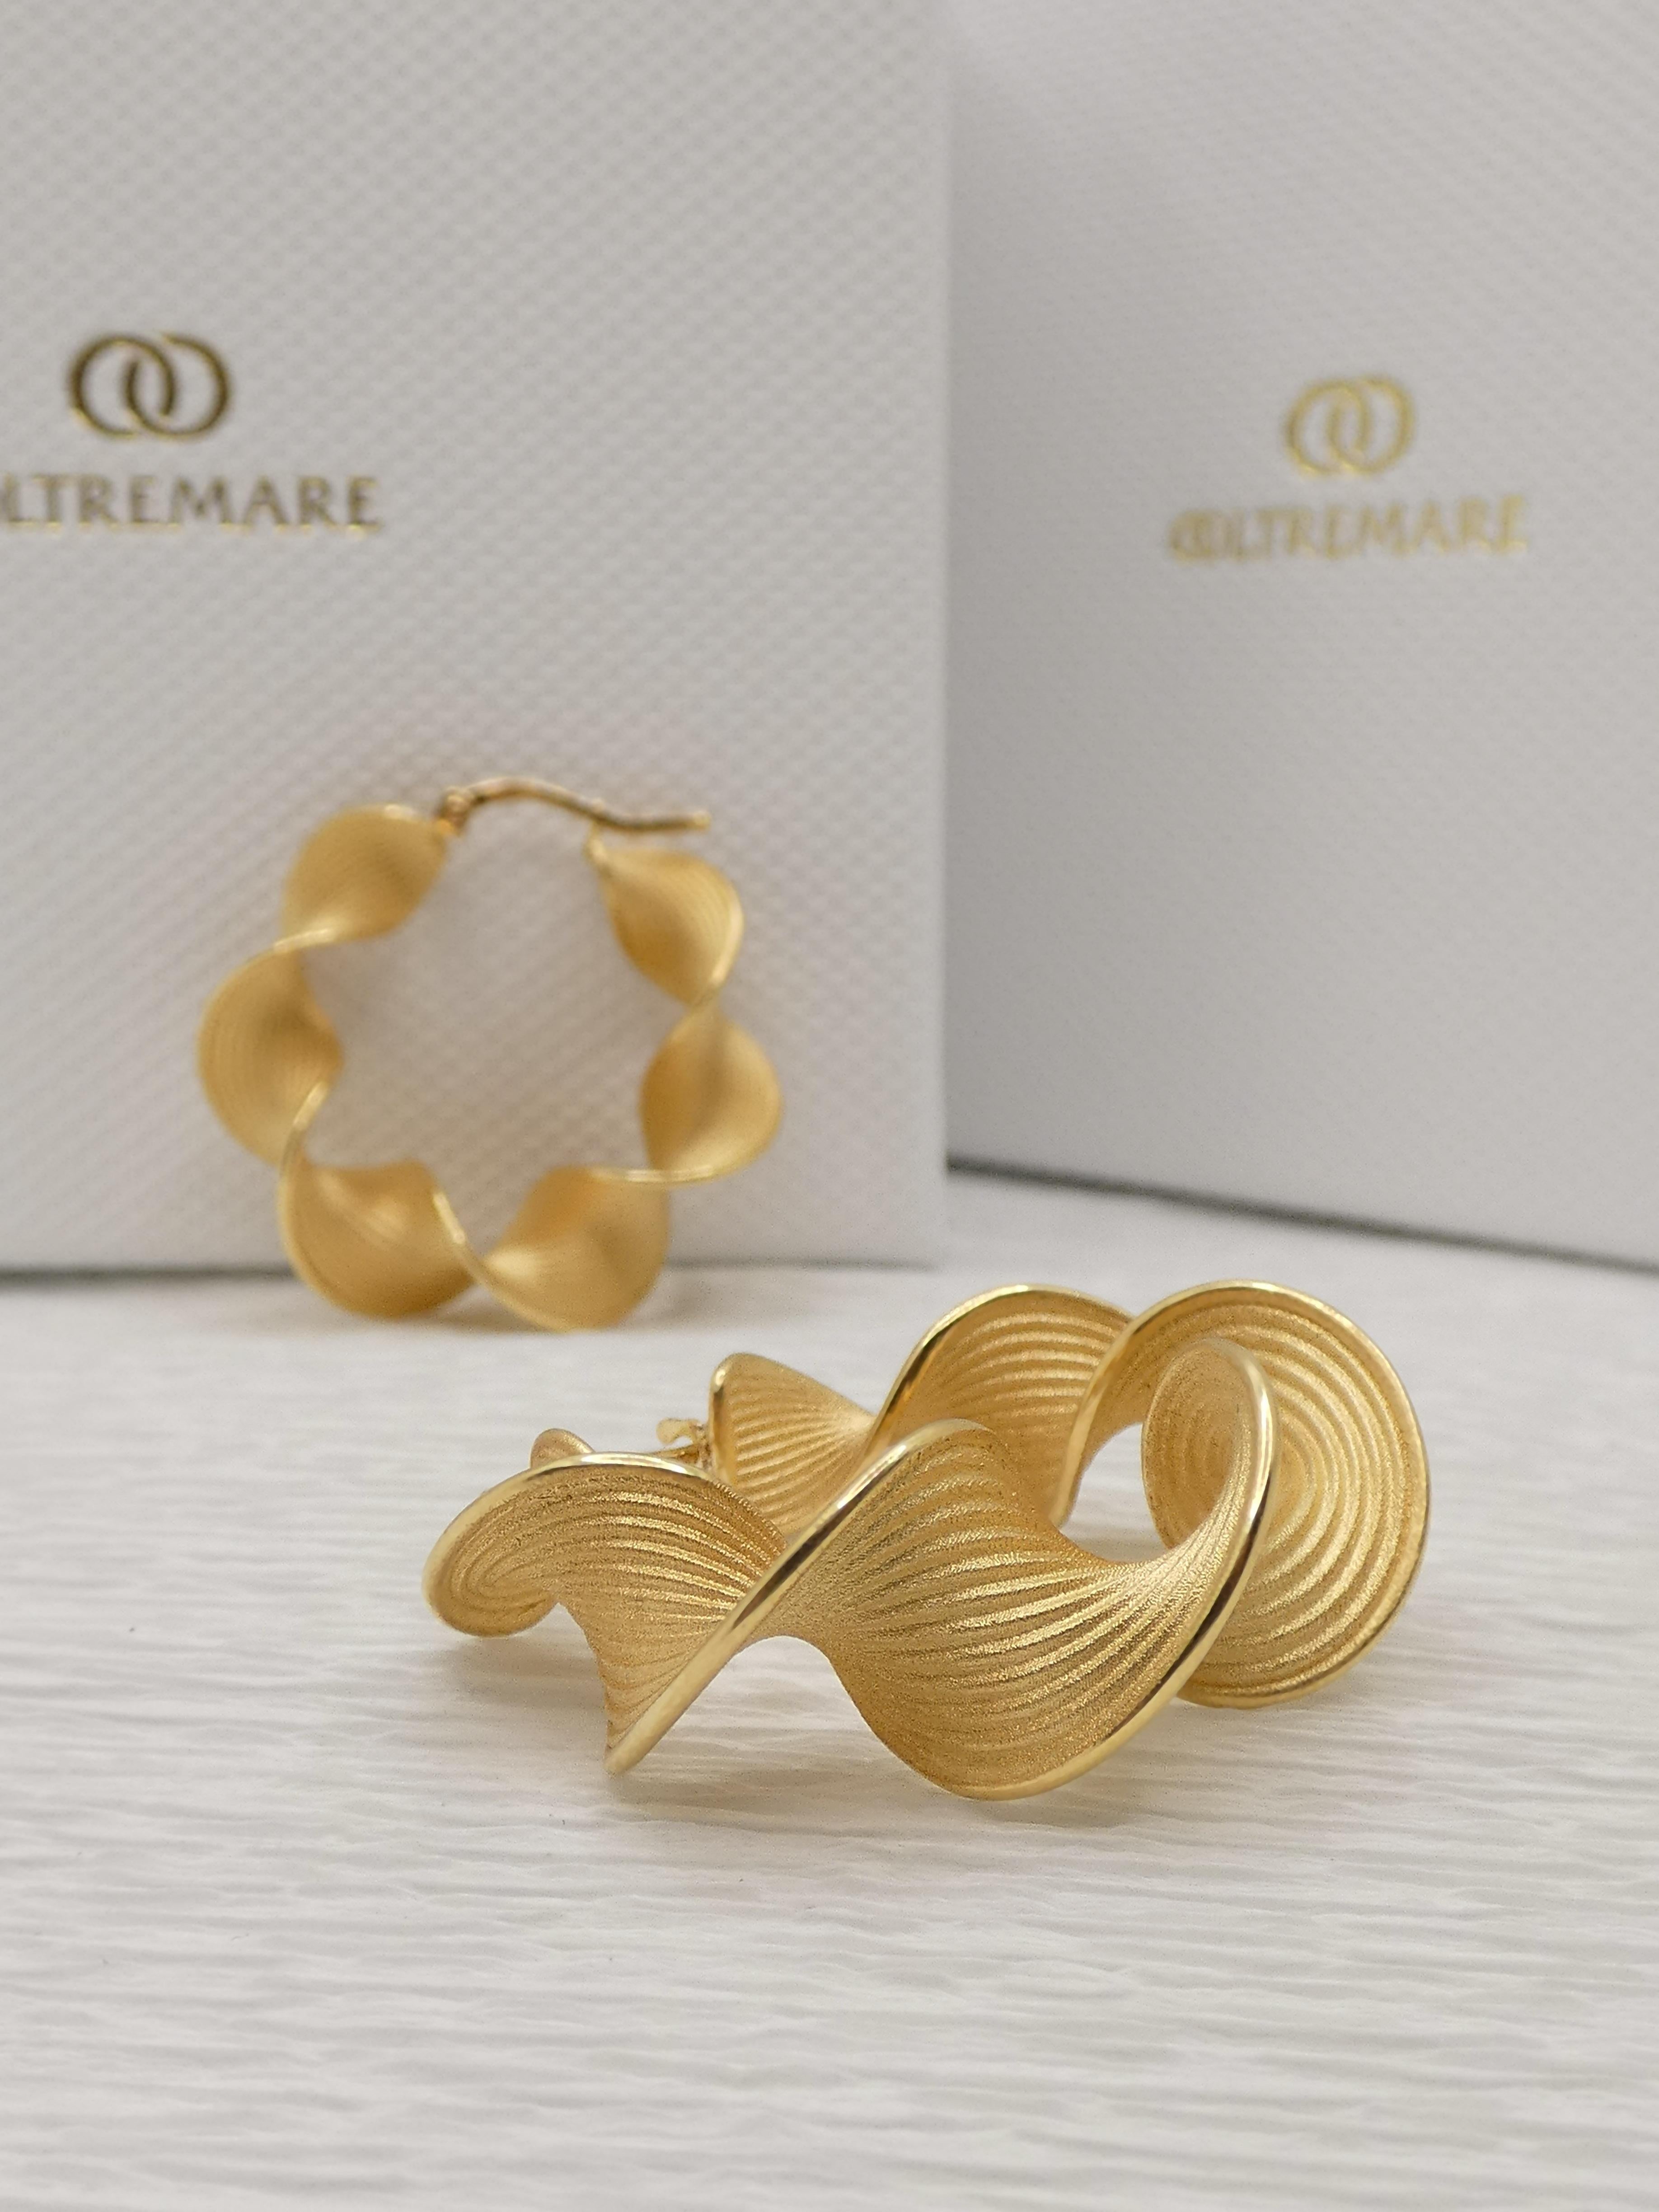 Contemporary Oltremare Gioielli  14k Twisted Gold Hoop Earrings Designed and Crafted in Italy For Sale